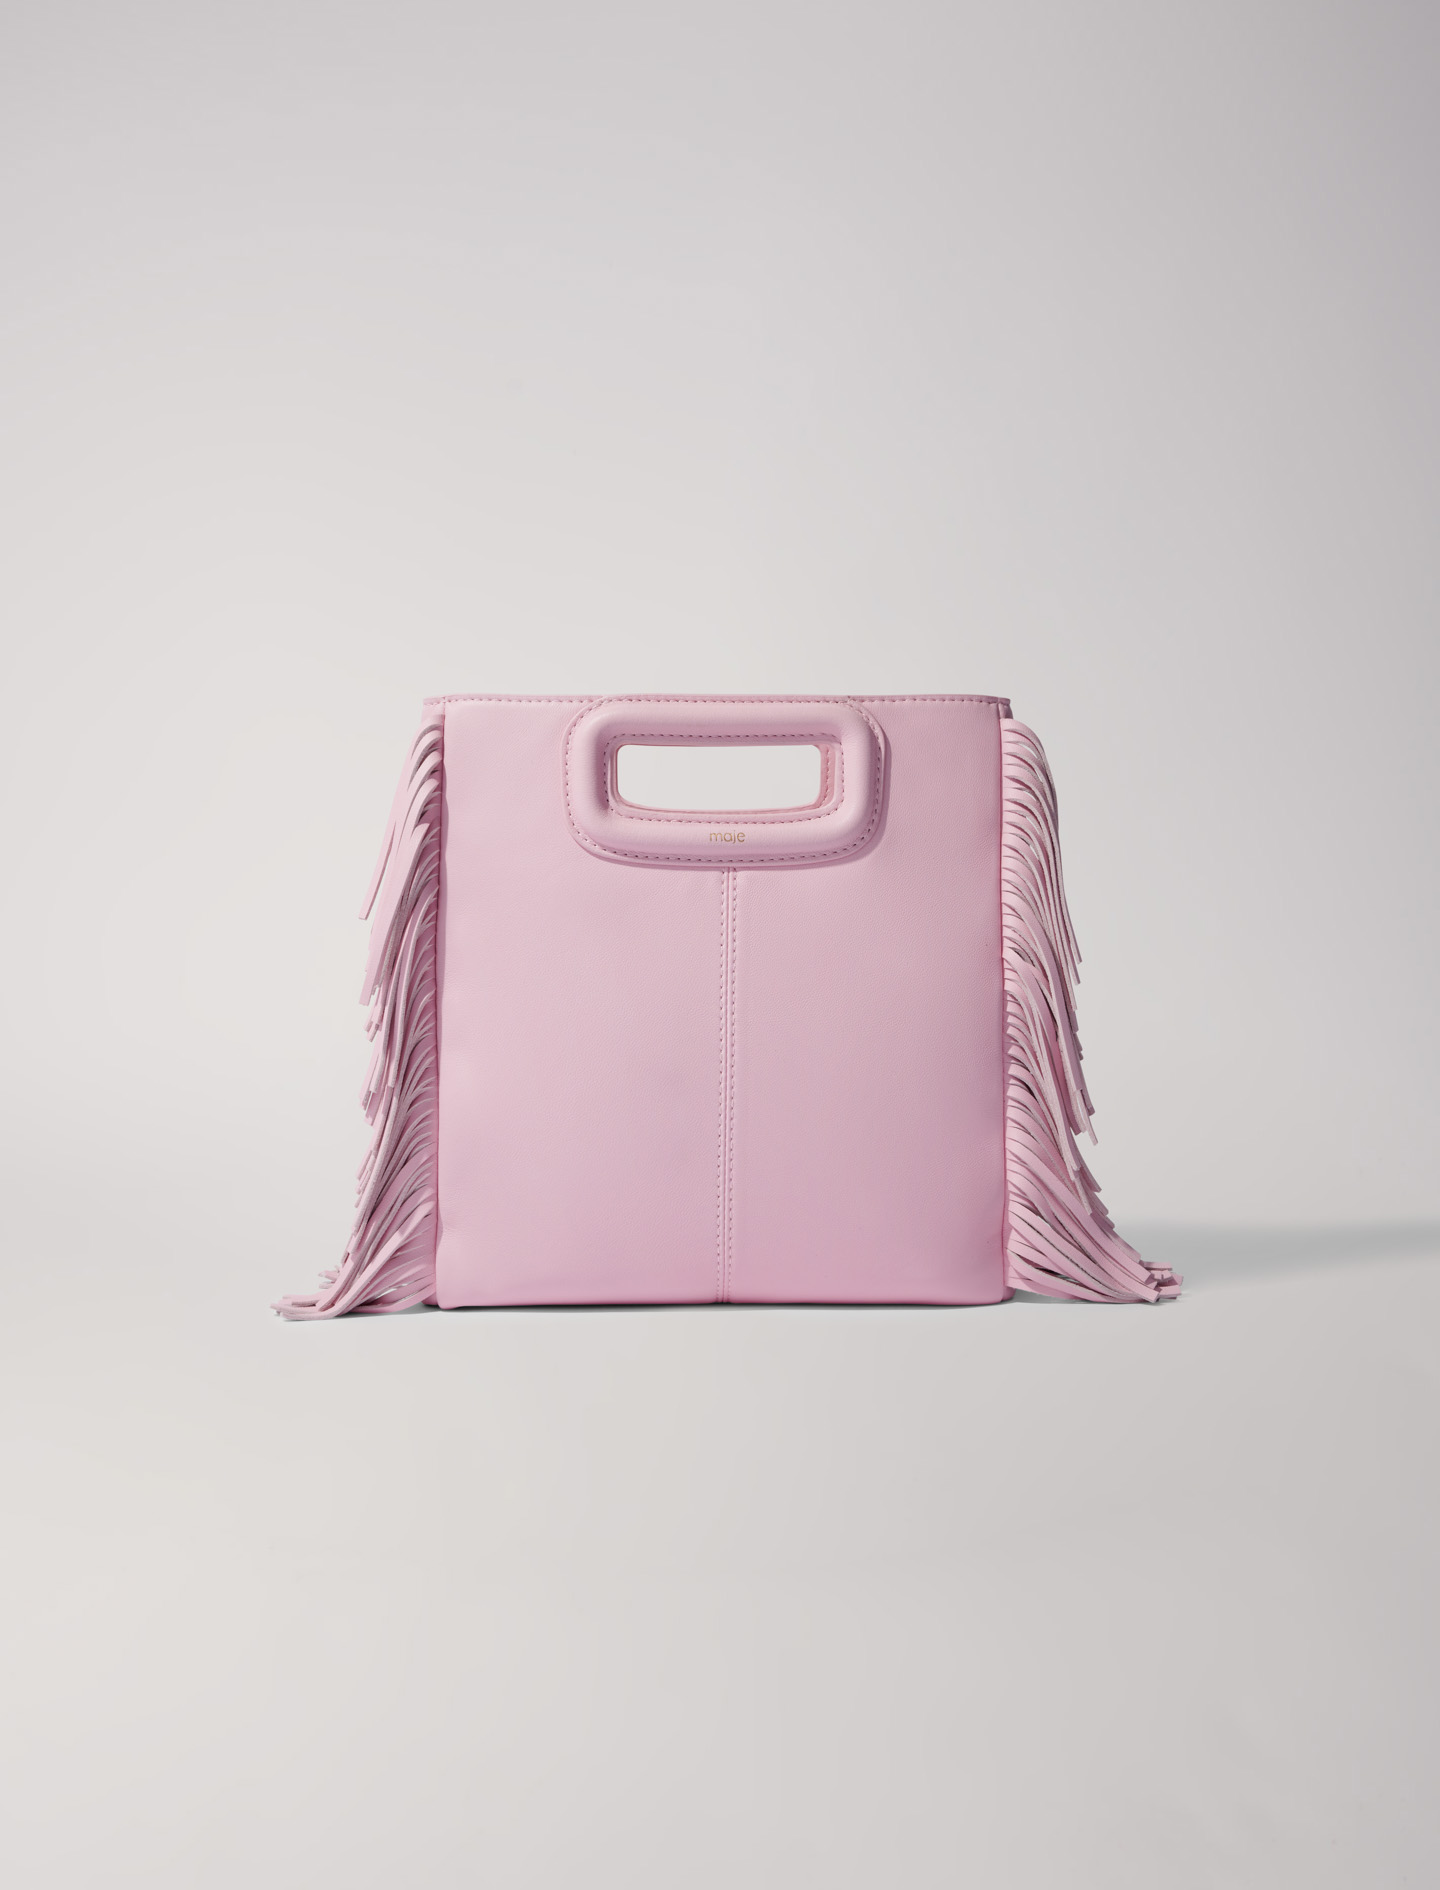 Mixte's polyester Leather: Smooth leather M bag with fringing for Spring/Summer, size Mixte-All Bags-OS (ONE SIZE), in color Pale Pink / Red